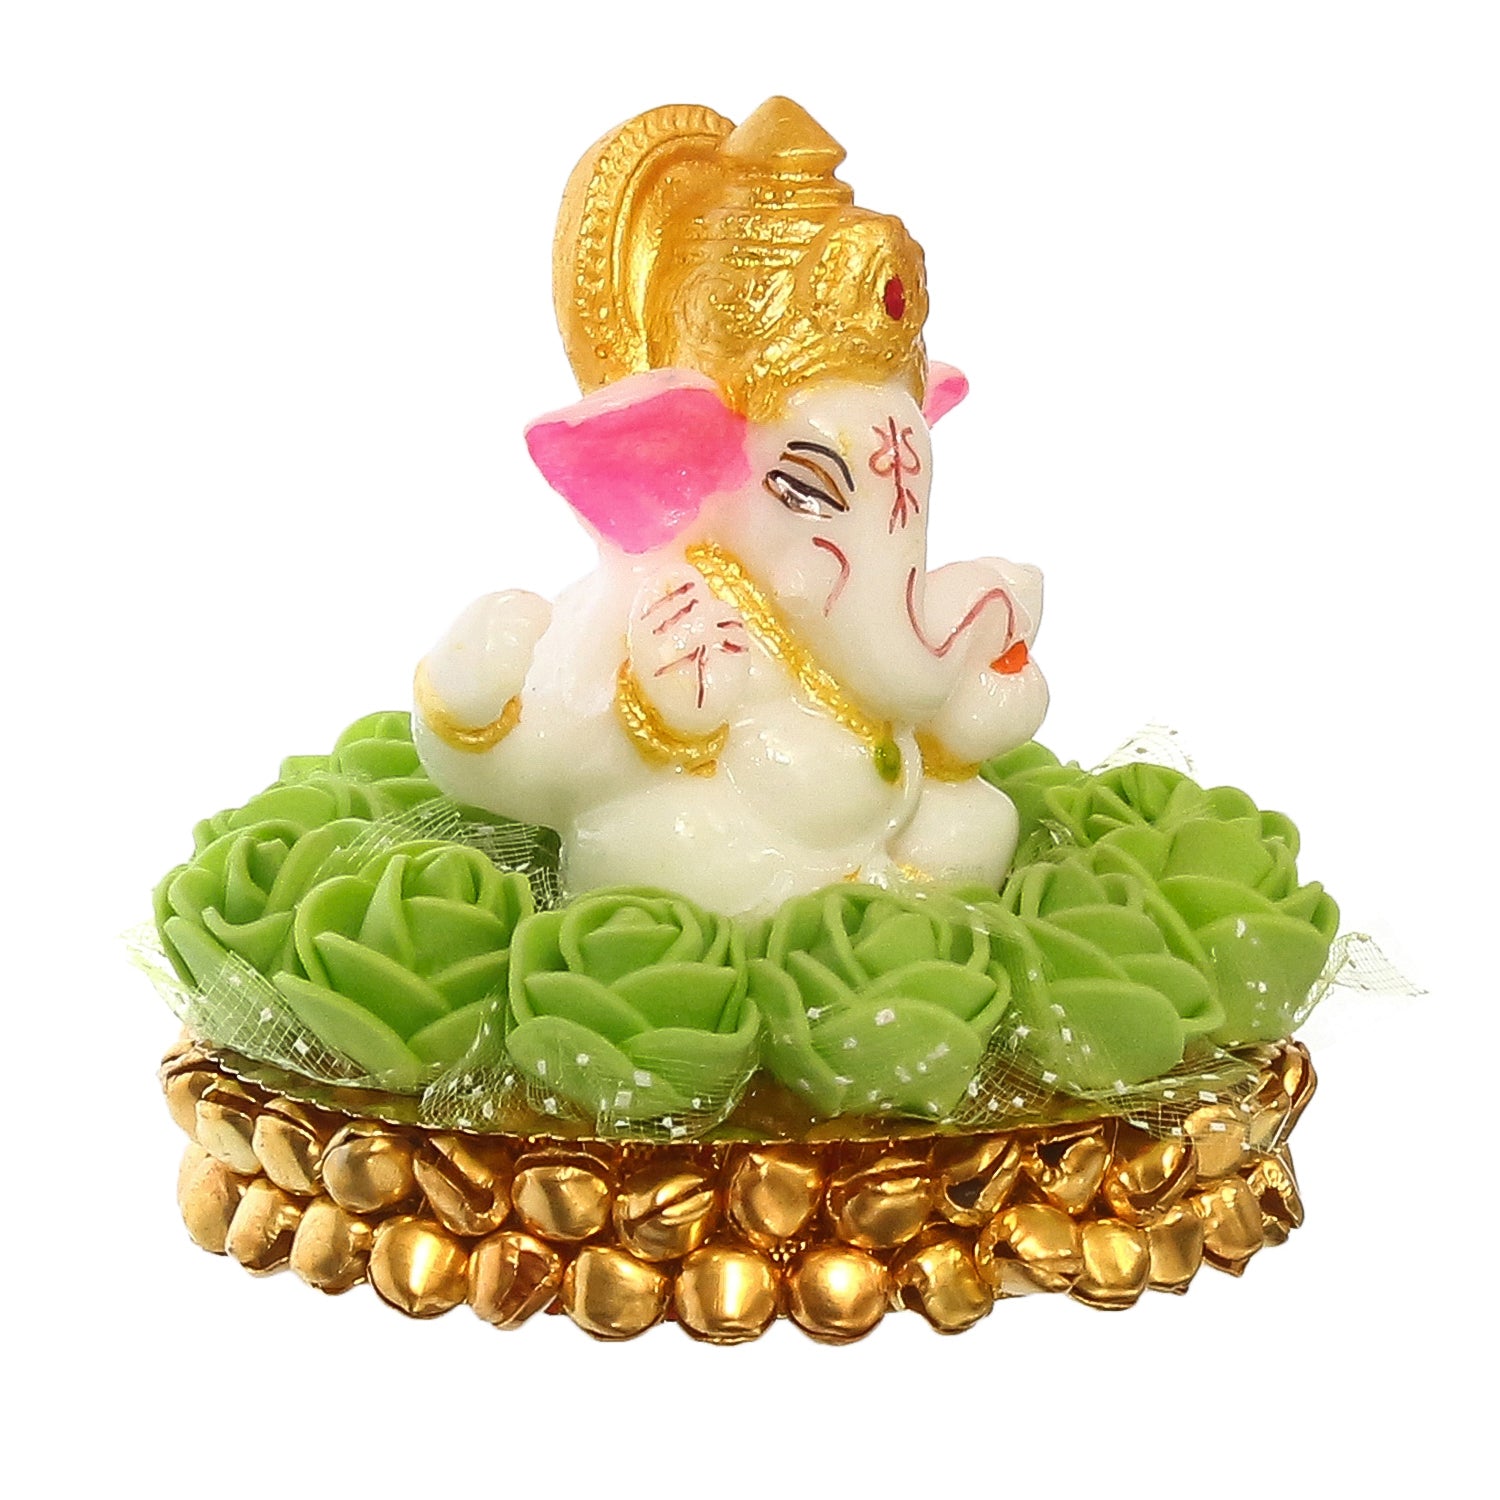 Lord Ganesha Idol on Decorative Handcrafted Plate with Green Flowers 4